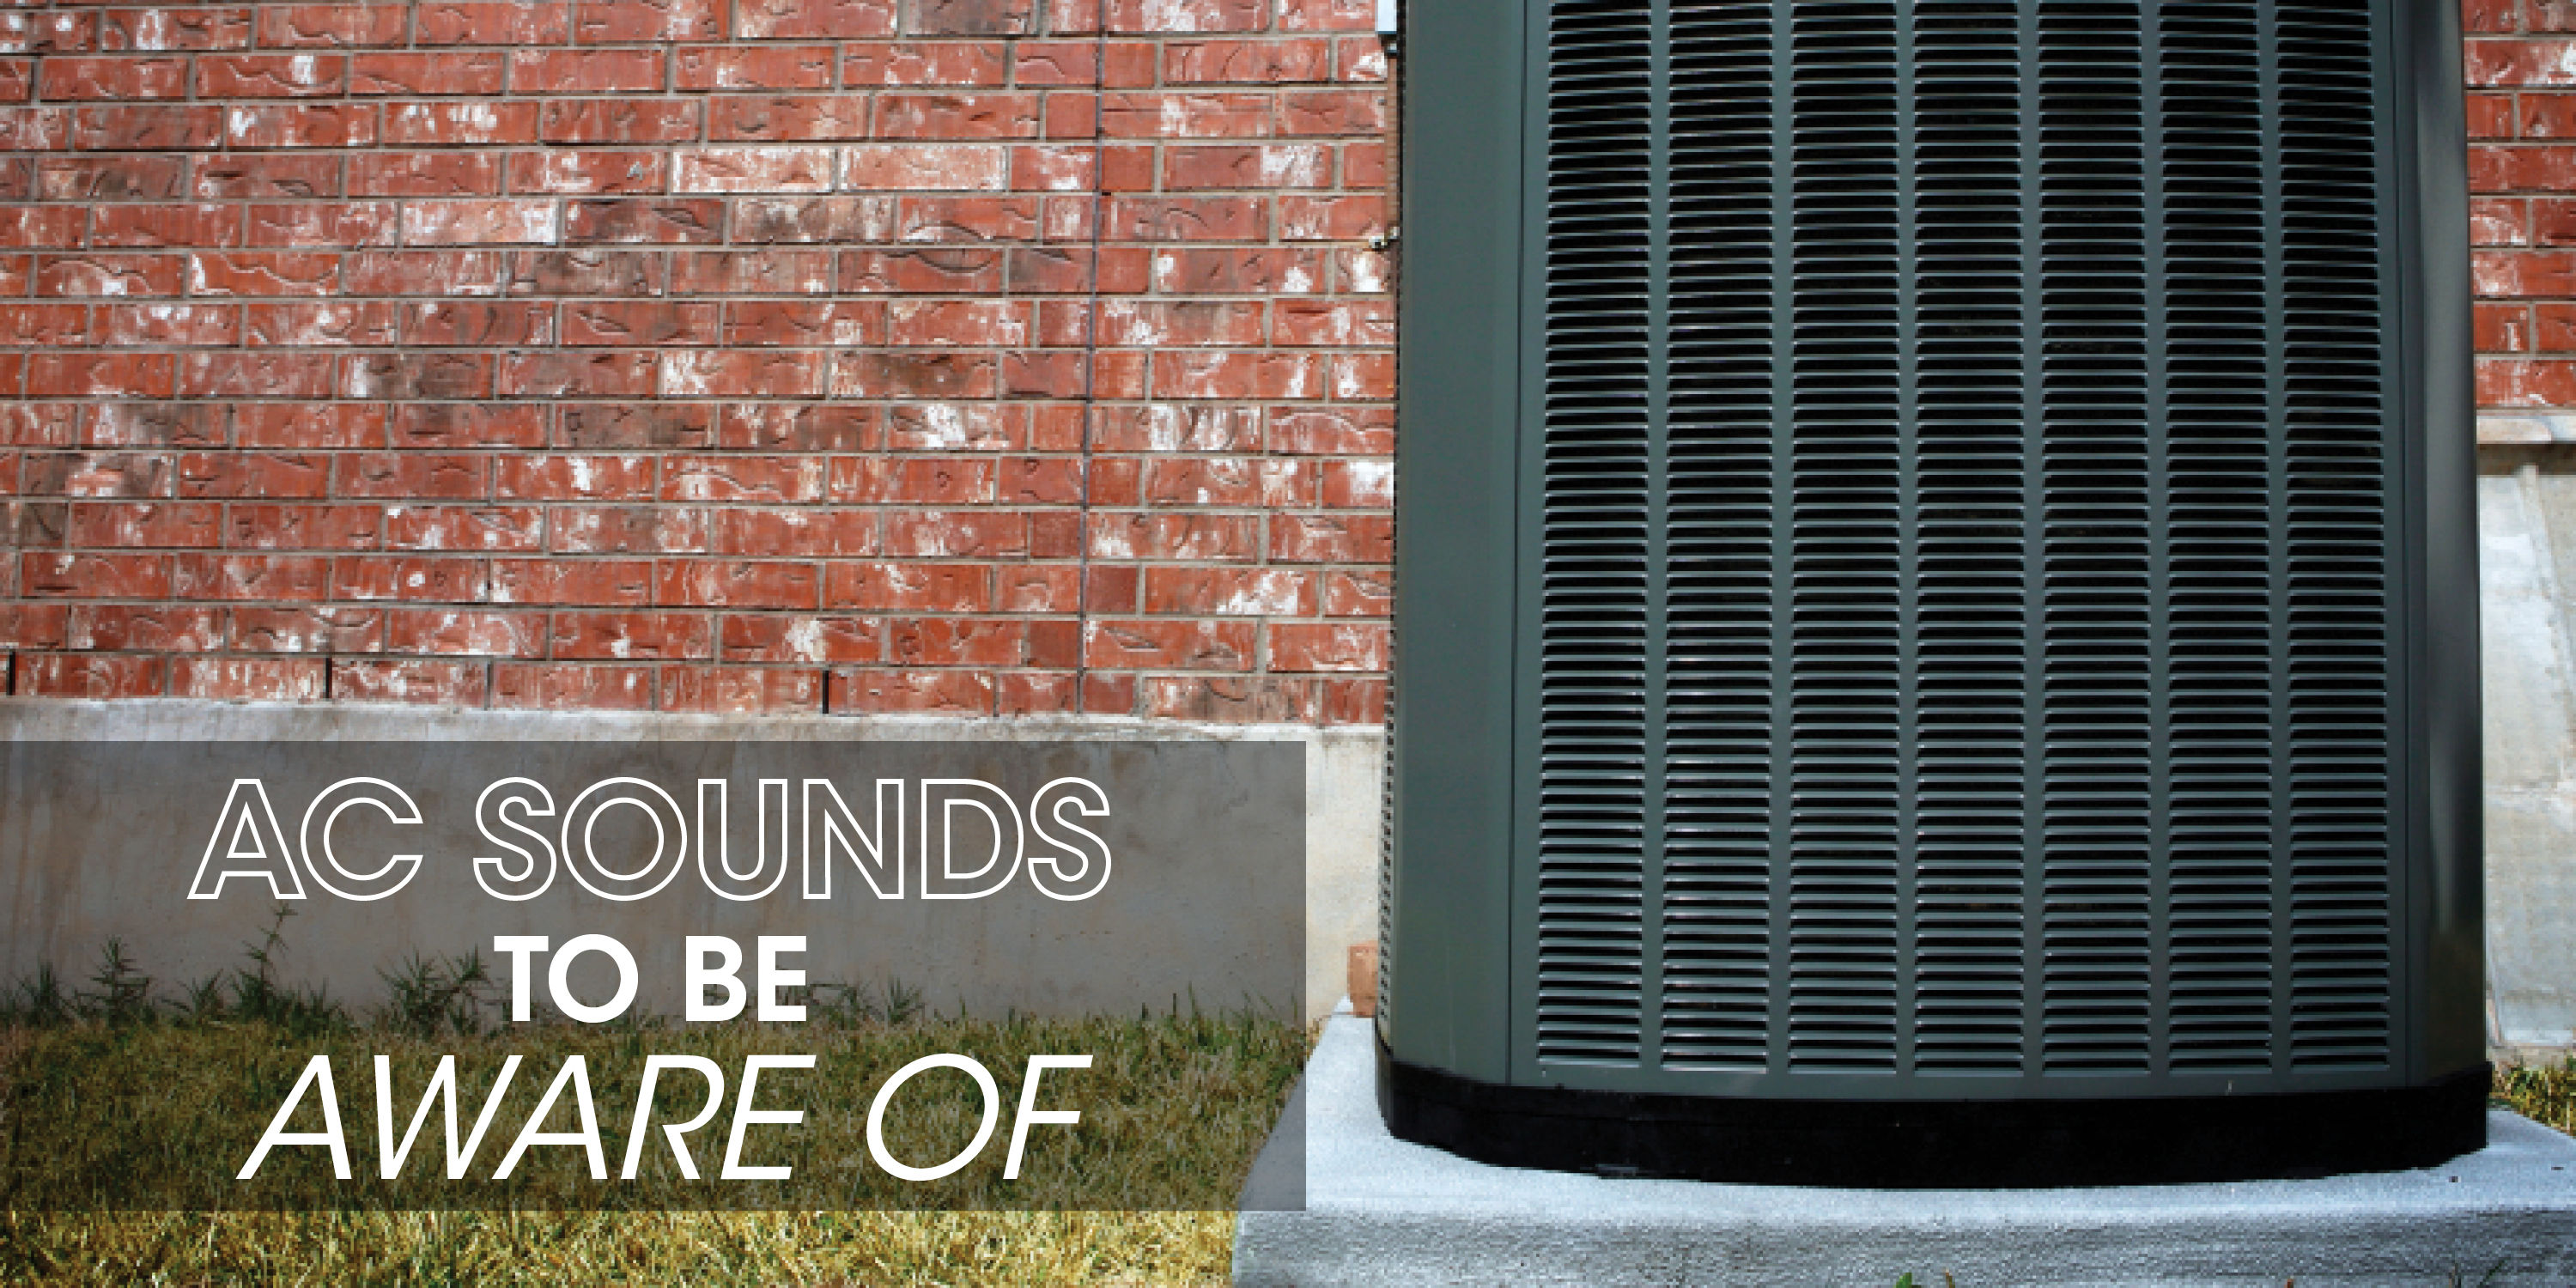 AC condenser unit with text: "AC sounds to be aware of"